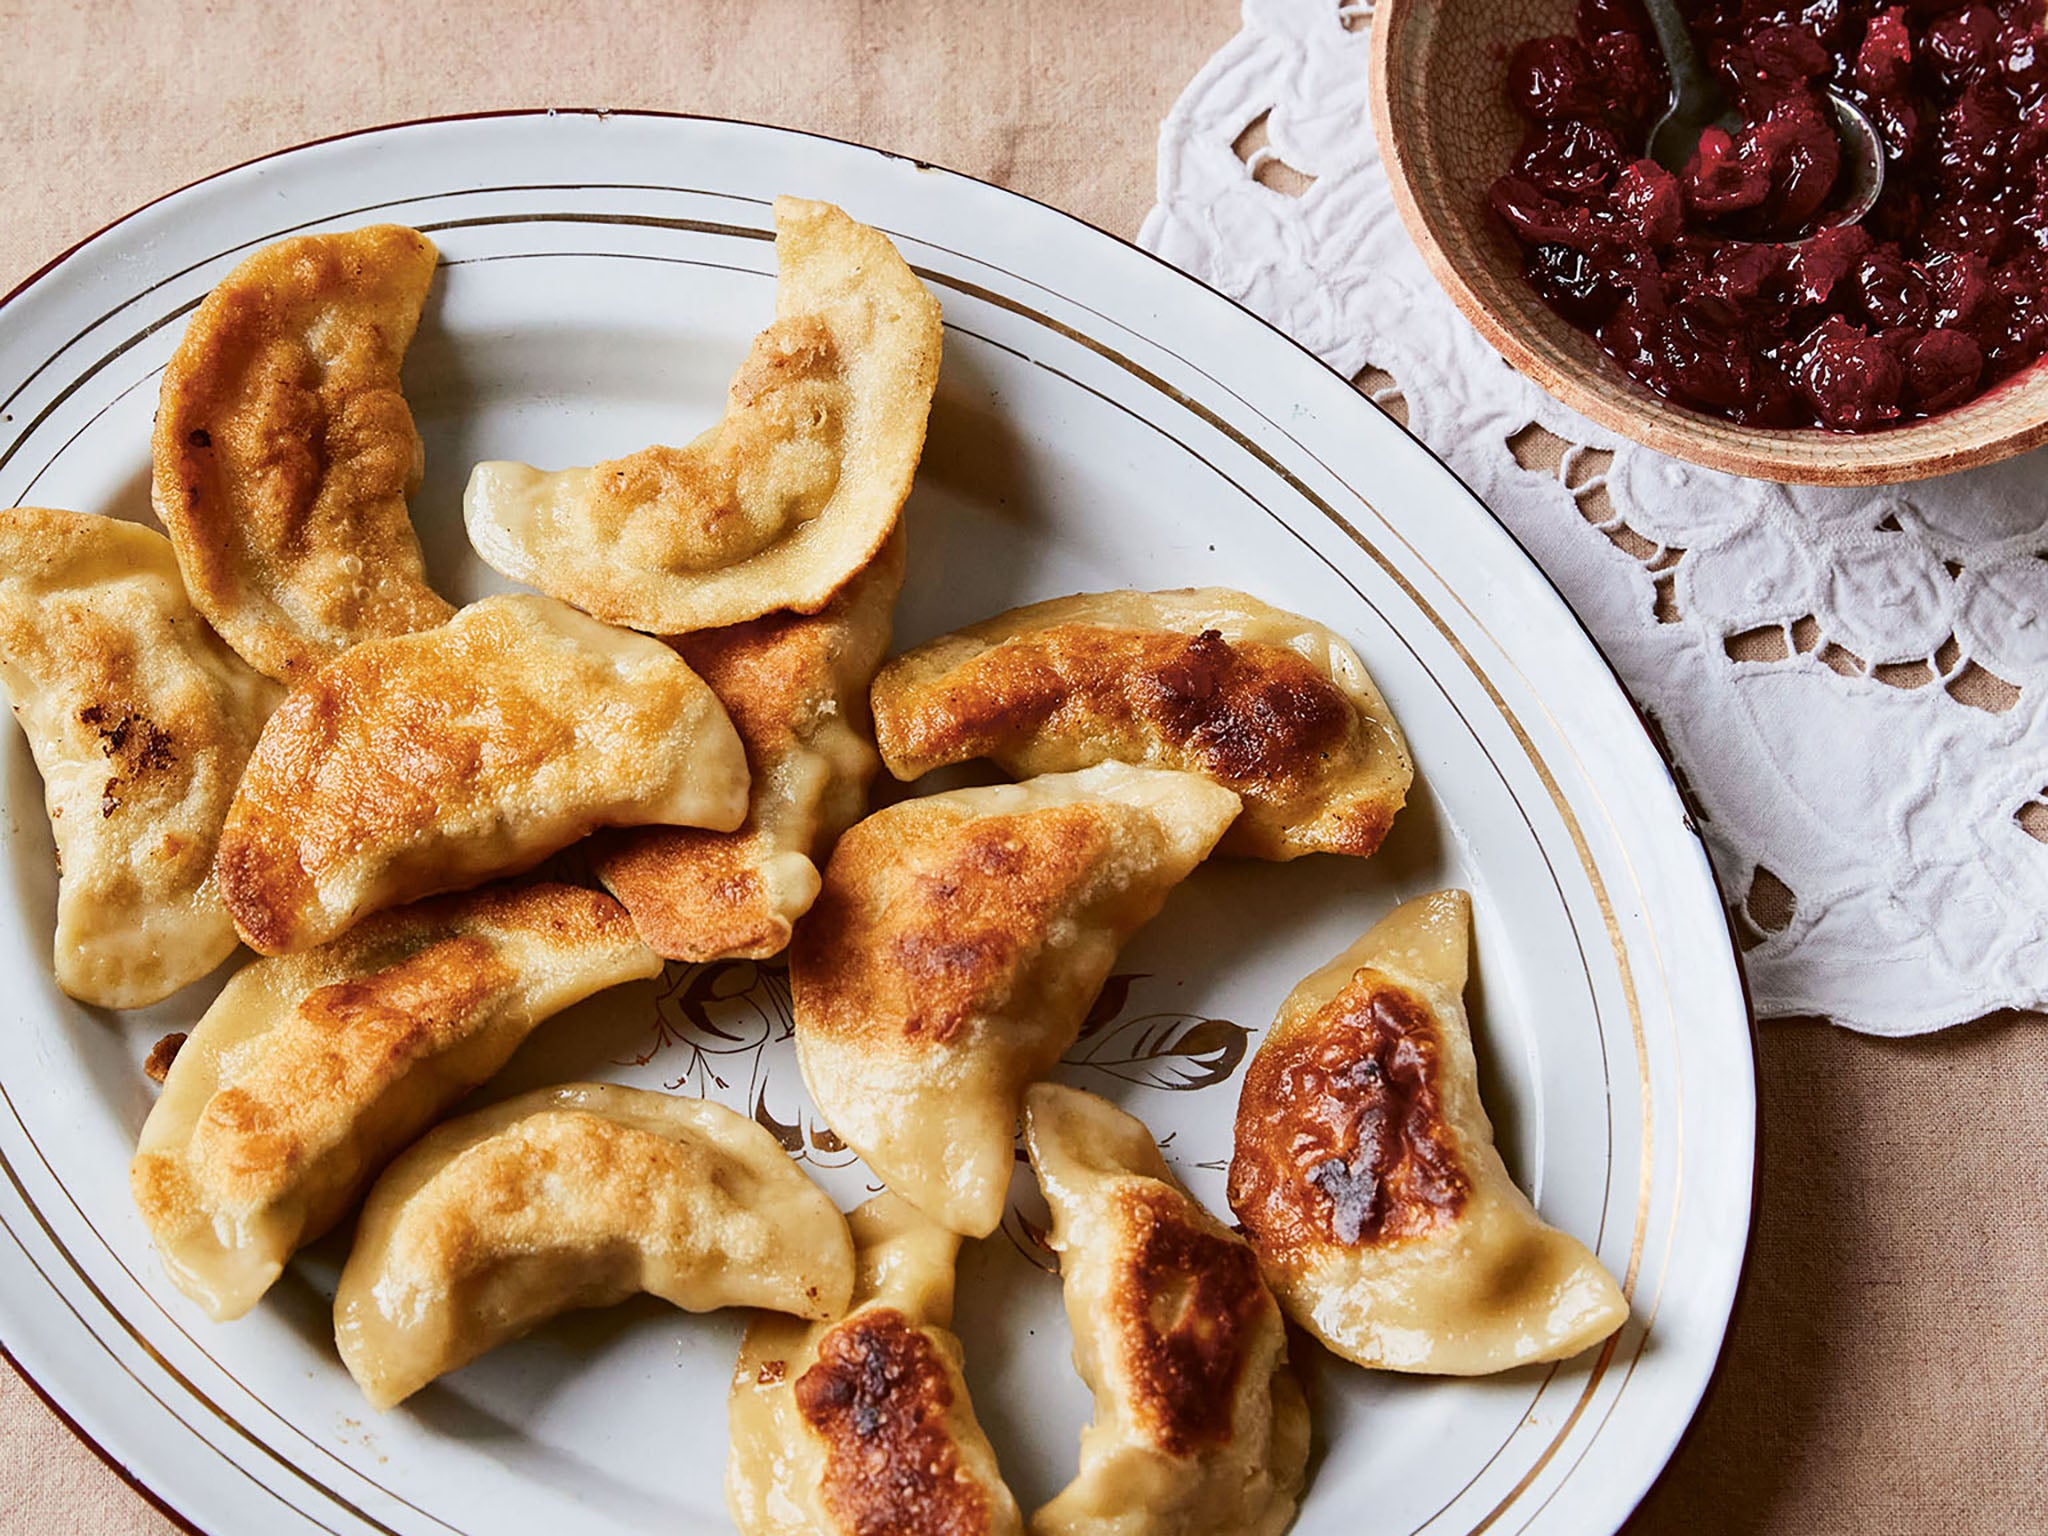 Pierogi are great after any roast, but particularly at Christmas when the family are on hand to help